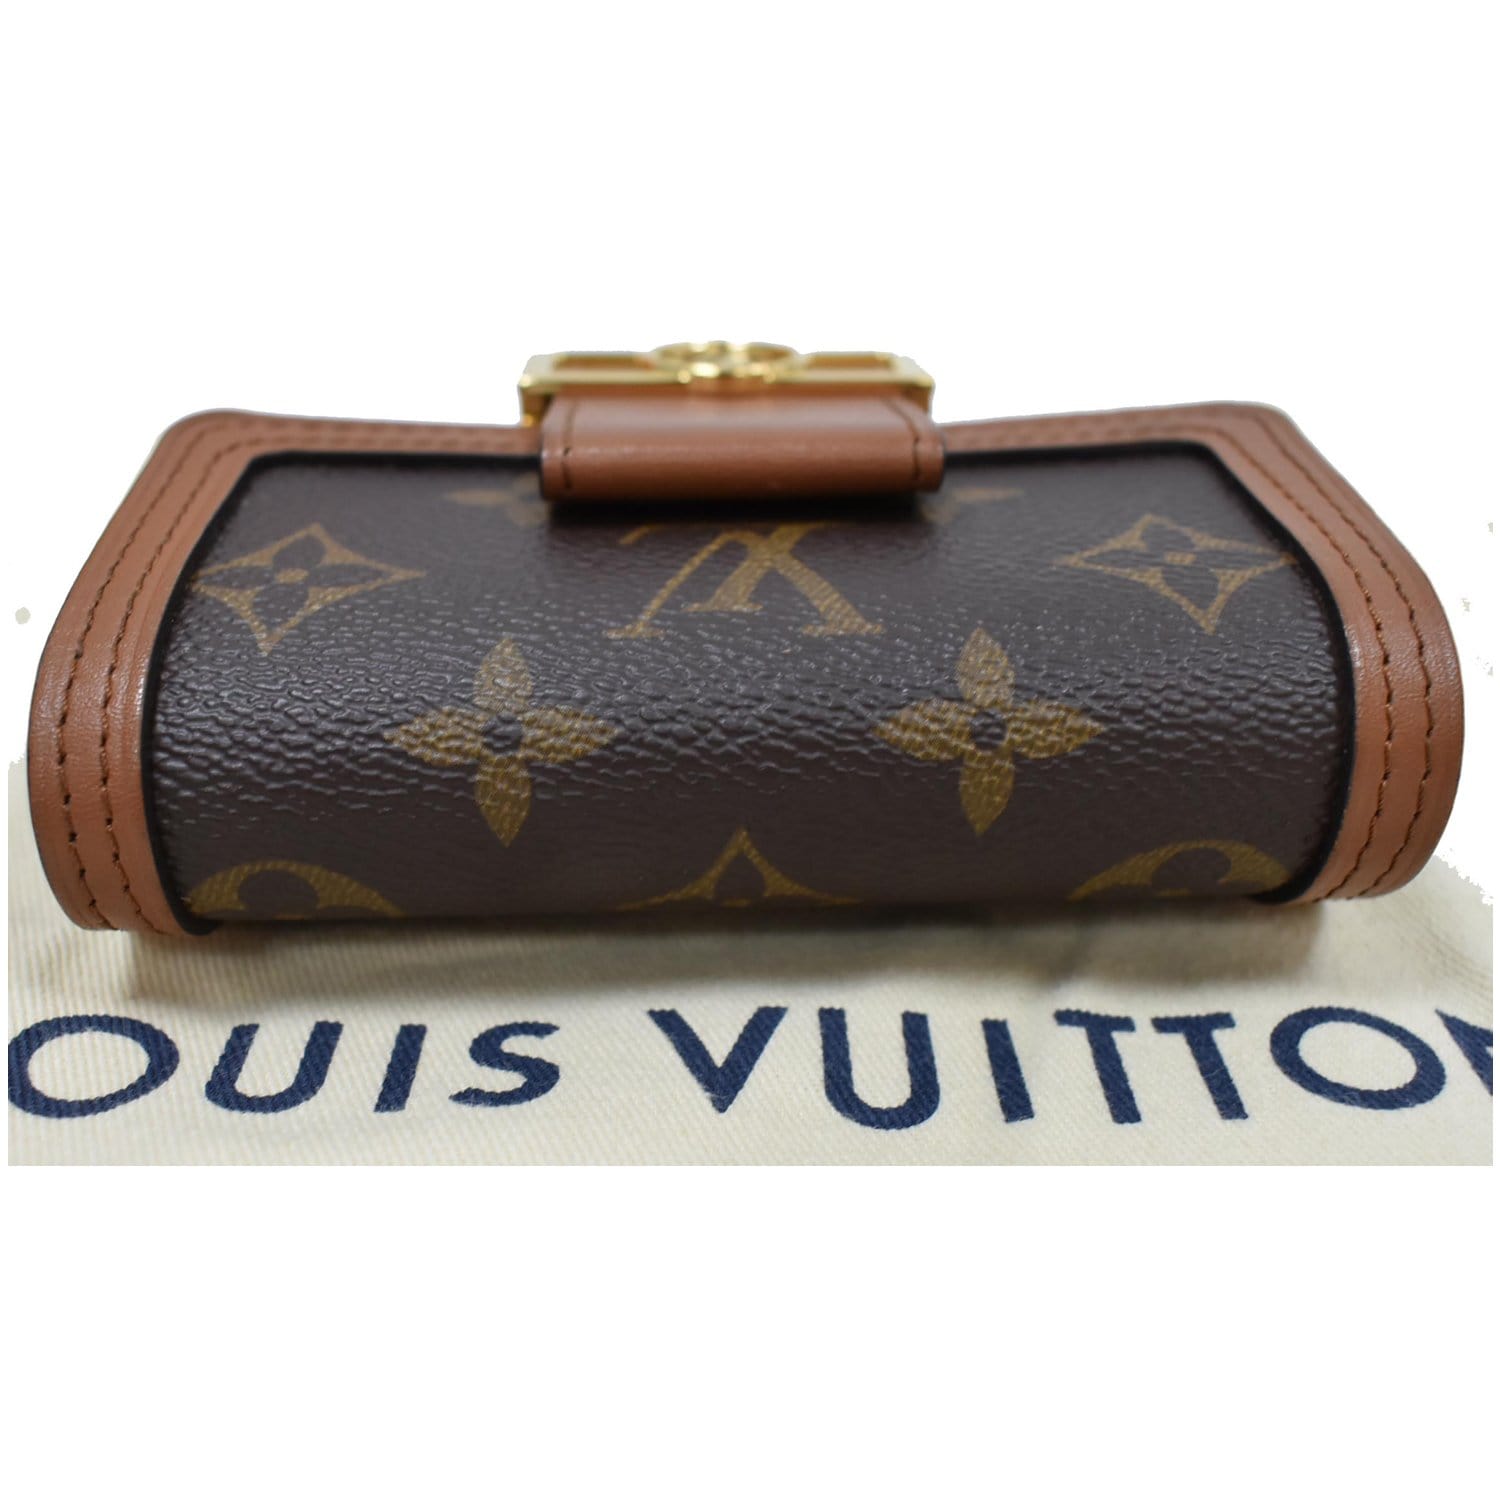 LOUIS VUITTON® Dauphine Compact Wallet  Compact wallets, Efficient wallet,  Louis vuitton key pouch